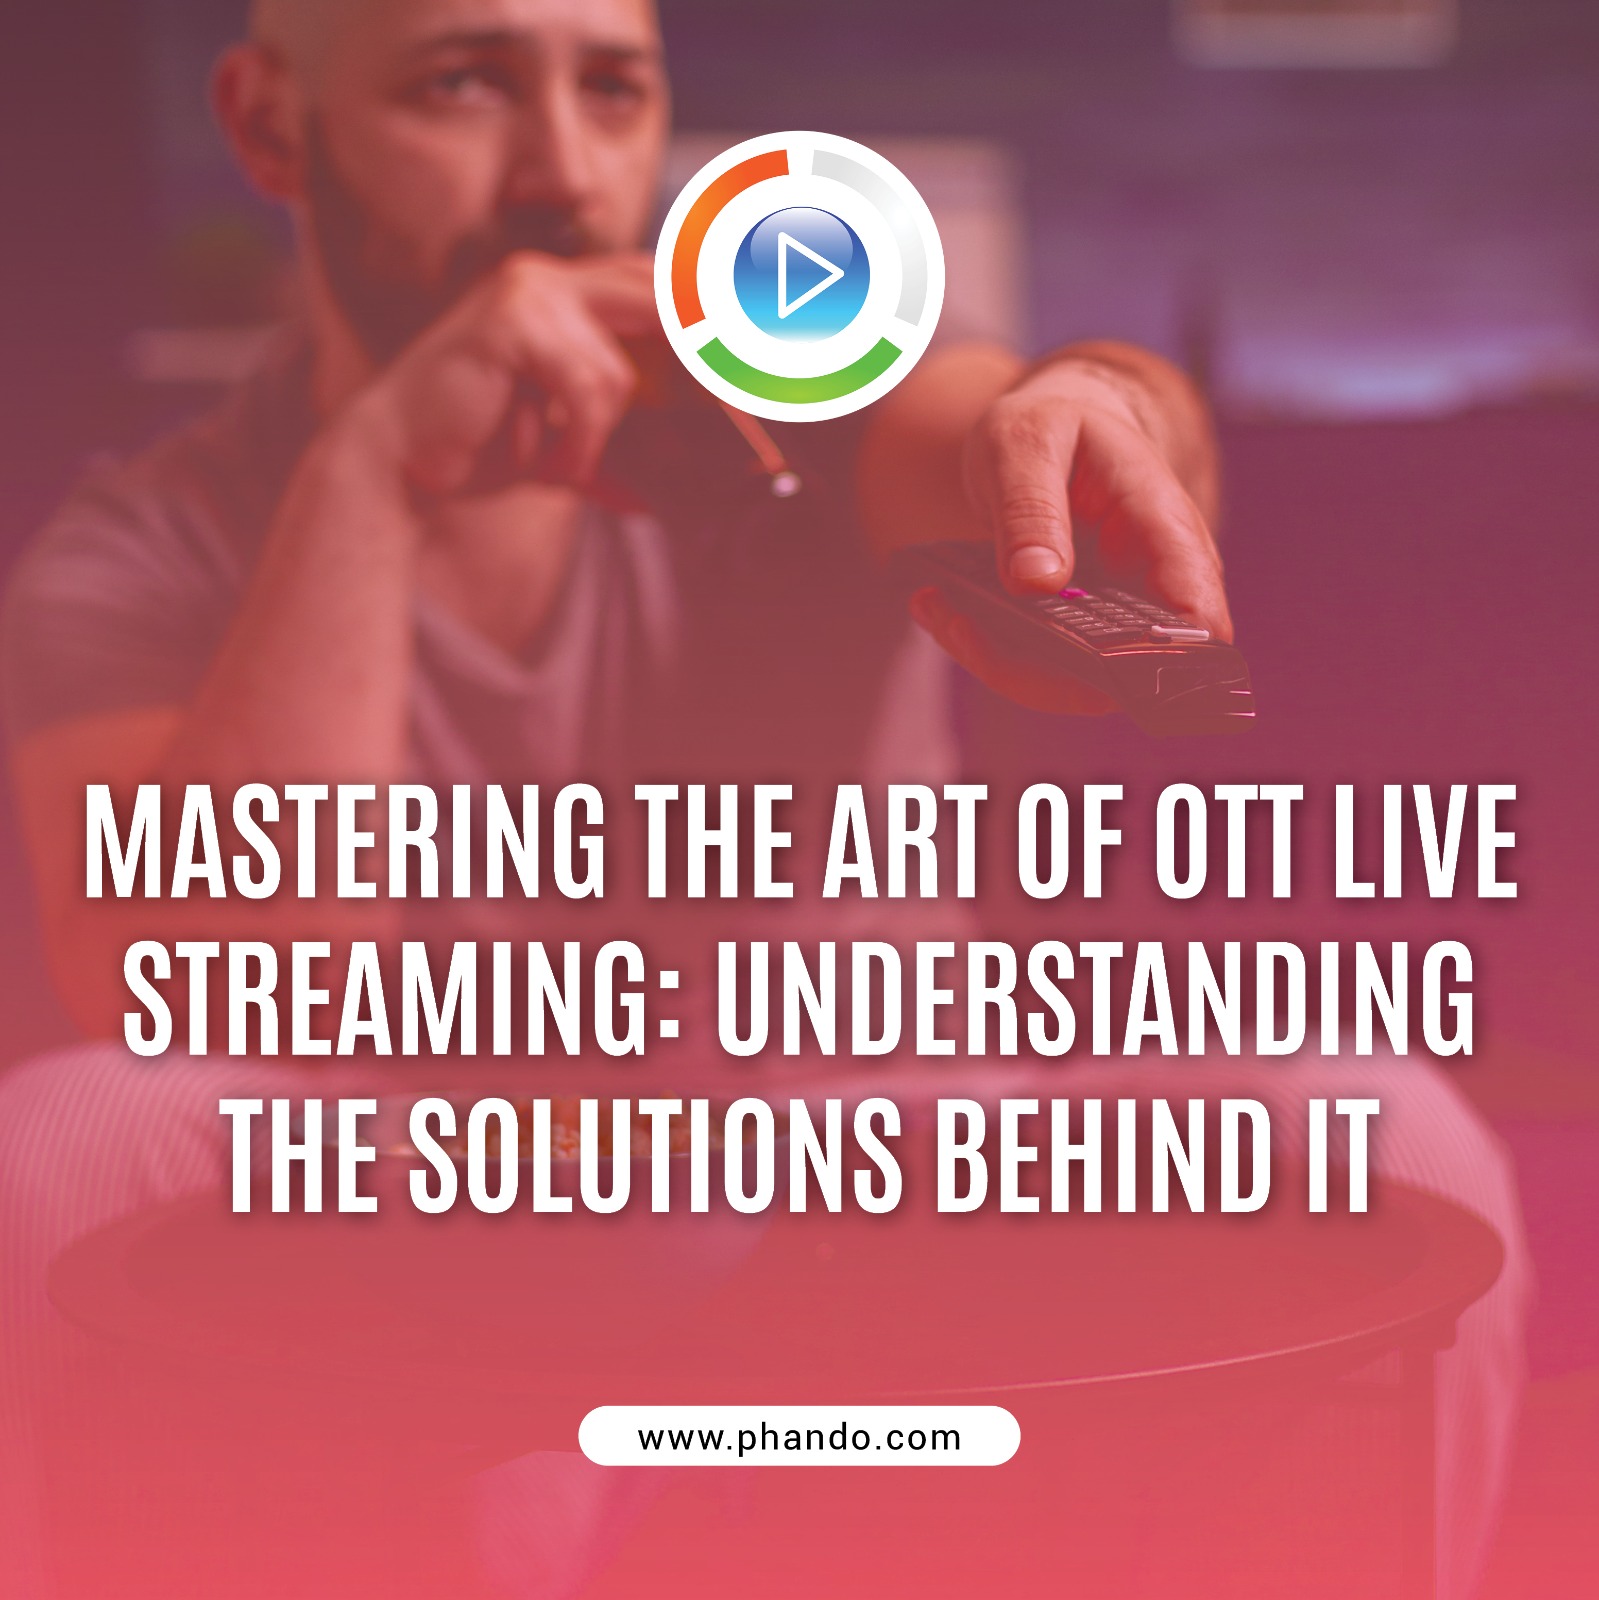 Mastering the Art of OTT Live Streaming: Understanding the Solutions Behind It